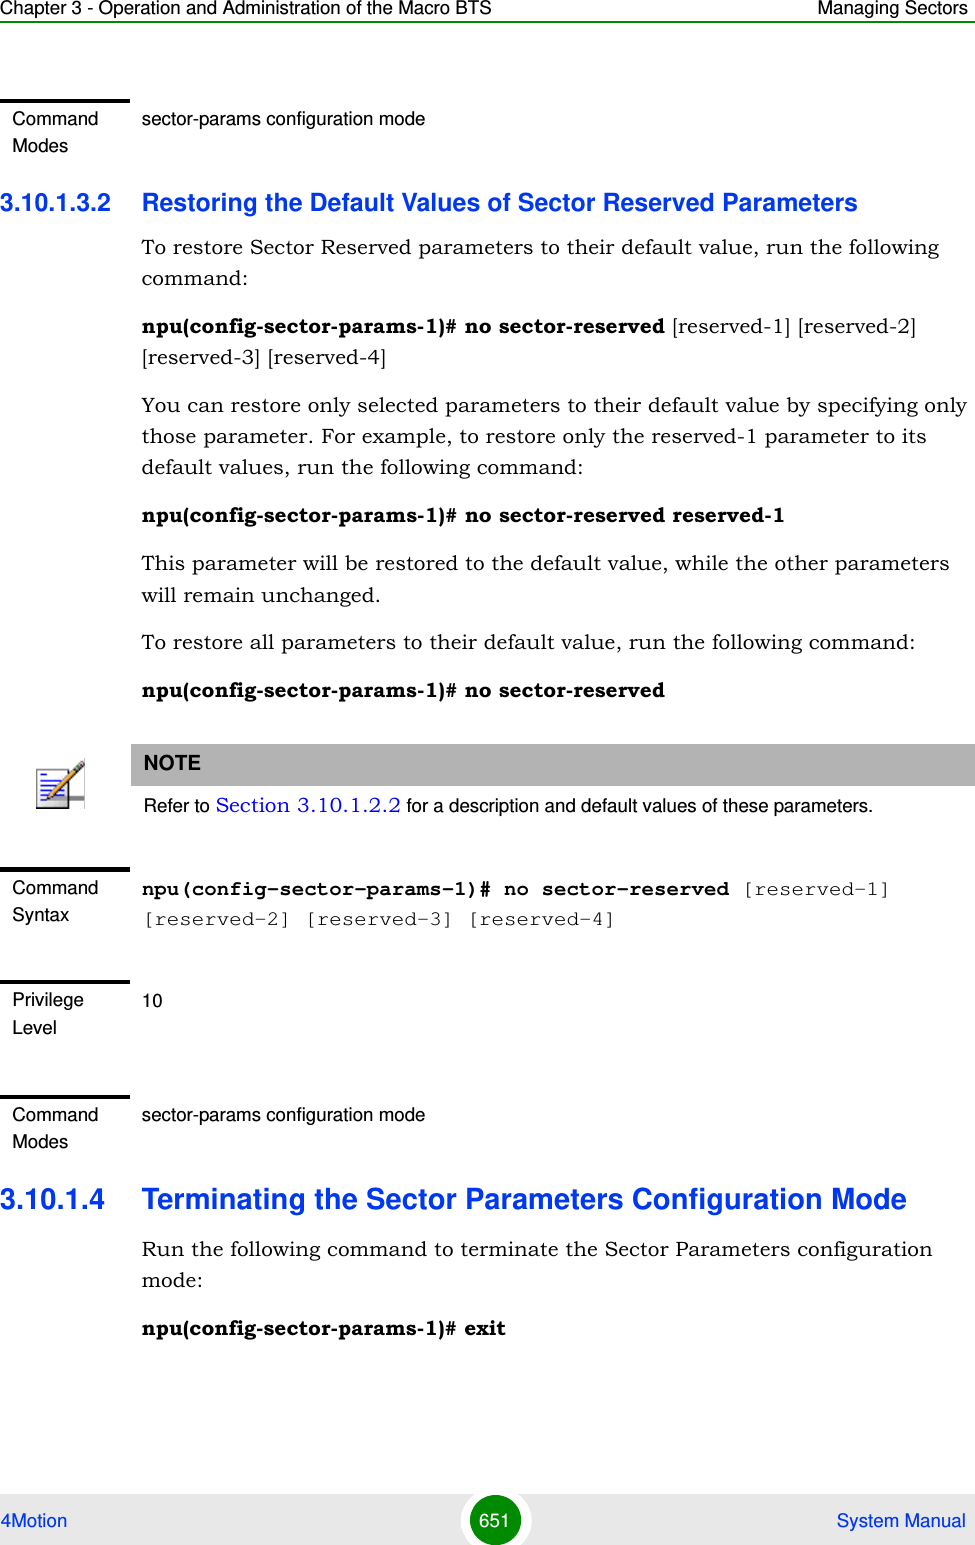 Chapter 3 - Operation and Administration of the Macro BTS Managing Sectors4Motion 651  System Manual3.10.1.3.2 Restoring the Default Values of Sector Reserved ParametersTo restore Sector Reserved parameters to their default value, run the following command:npu(config-sector-params-1)# no sector-reserved [reserved-1] [reserved-2] [reserved-3] [reserved-4]You can restore only selected parameters to their default value by specifying only those parameter. For example, to restore only the reserved-1 parameter to its default values, run the following command:npu(config-sector-params-1)# no sector-reserved reserved-1This parameter will be restored to the default value, while the other parameters will remain unchanged.To restore all parameters to their default value, run the following command:npu(config-sector-params-1)# no sector-reserved3.10.1.4 Terminating the Sector Parameters Configuration ModeRun the following command to terminate the Sector Parameters configuration mode:npu(config-sector-params-1)# exitCommand Modessector-params configuration modeNOTERefer to Section 3.10.1.2.2 for a description and default values of these parameters.Command Syntaxnpu(config-sector-params-1)# no sector-reserved [reserved-1] [reserved-2] [reserved-3] [reserved-4]Privilege Level10Command Modessector-params configuration mode